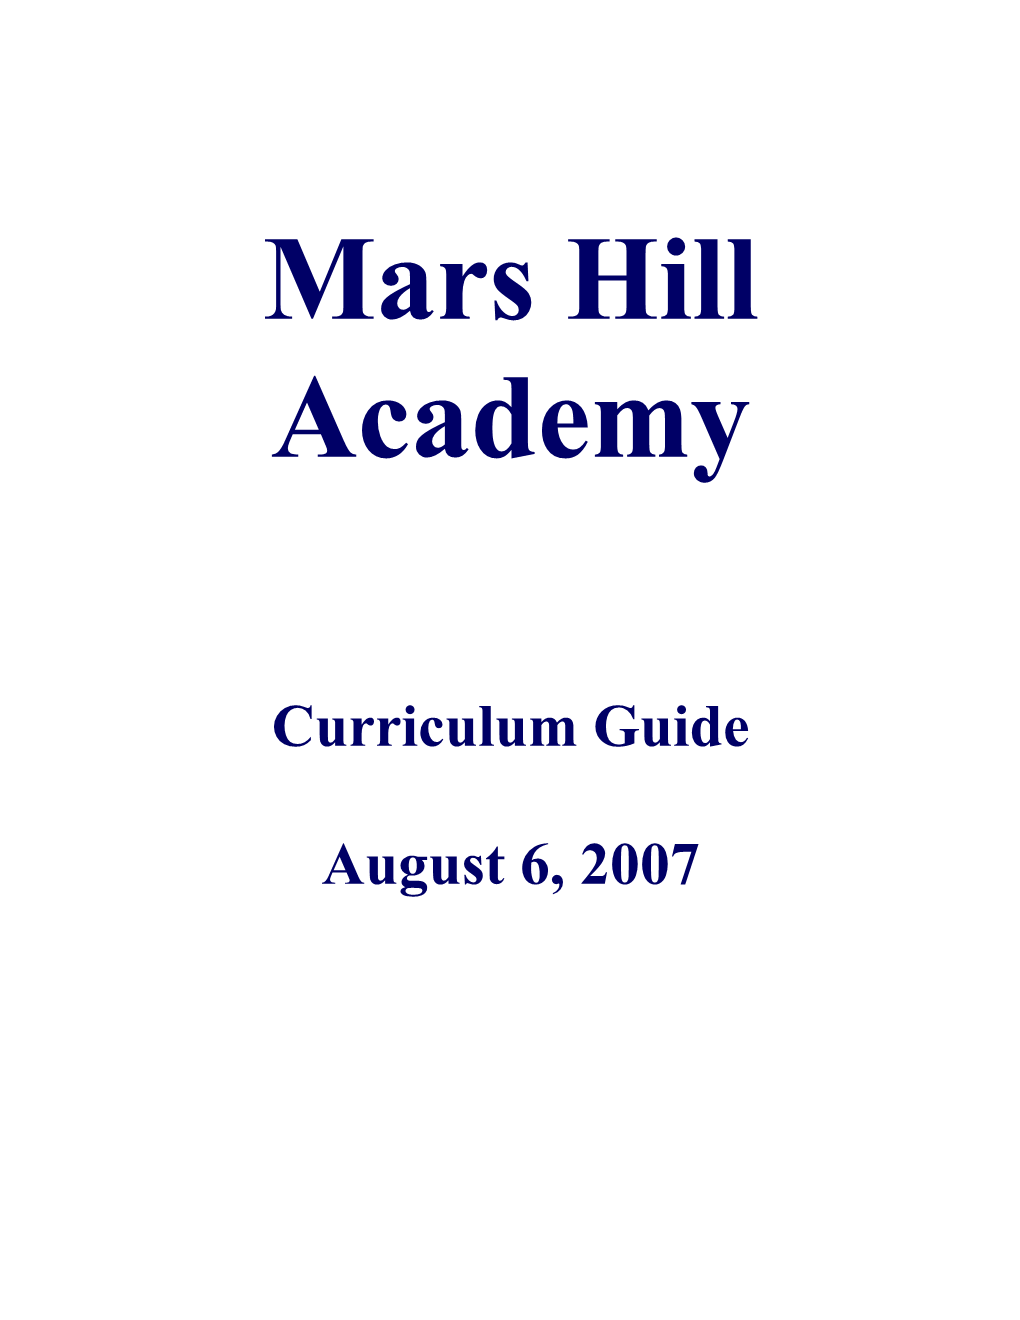 The Mars Hill Academy Board Would Like to Acknowledge All the People Who Worked So Hard